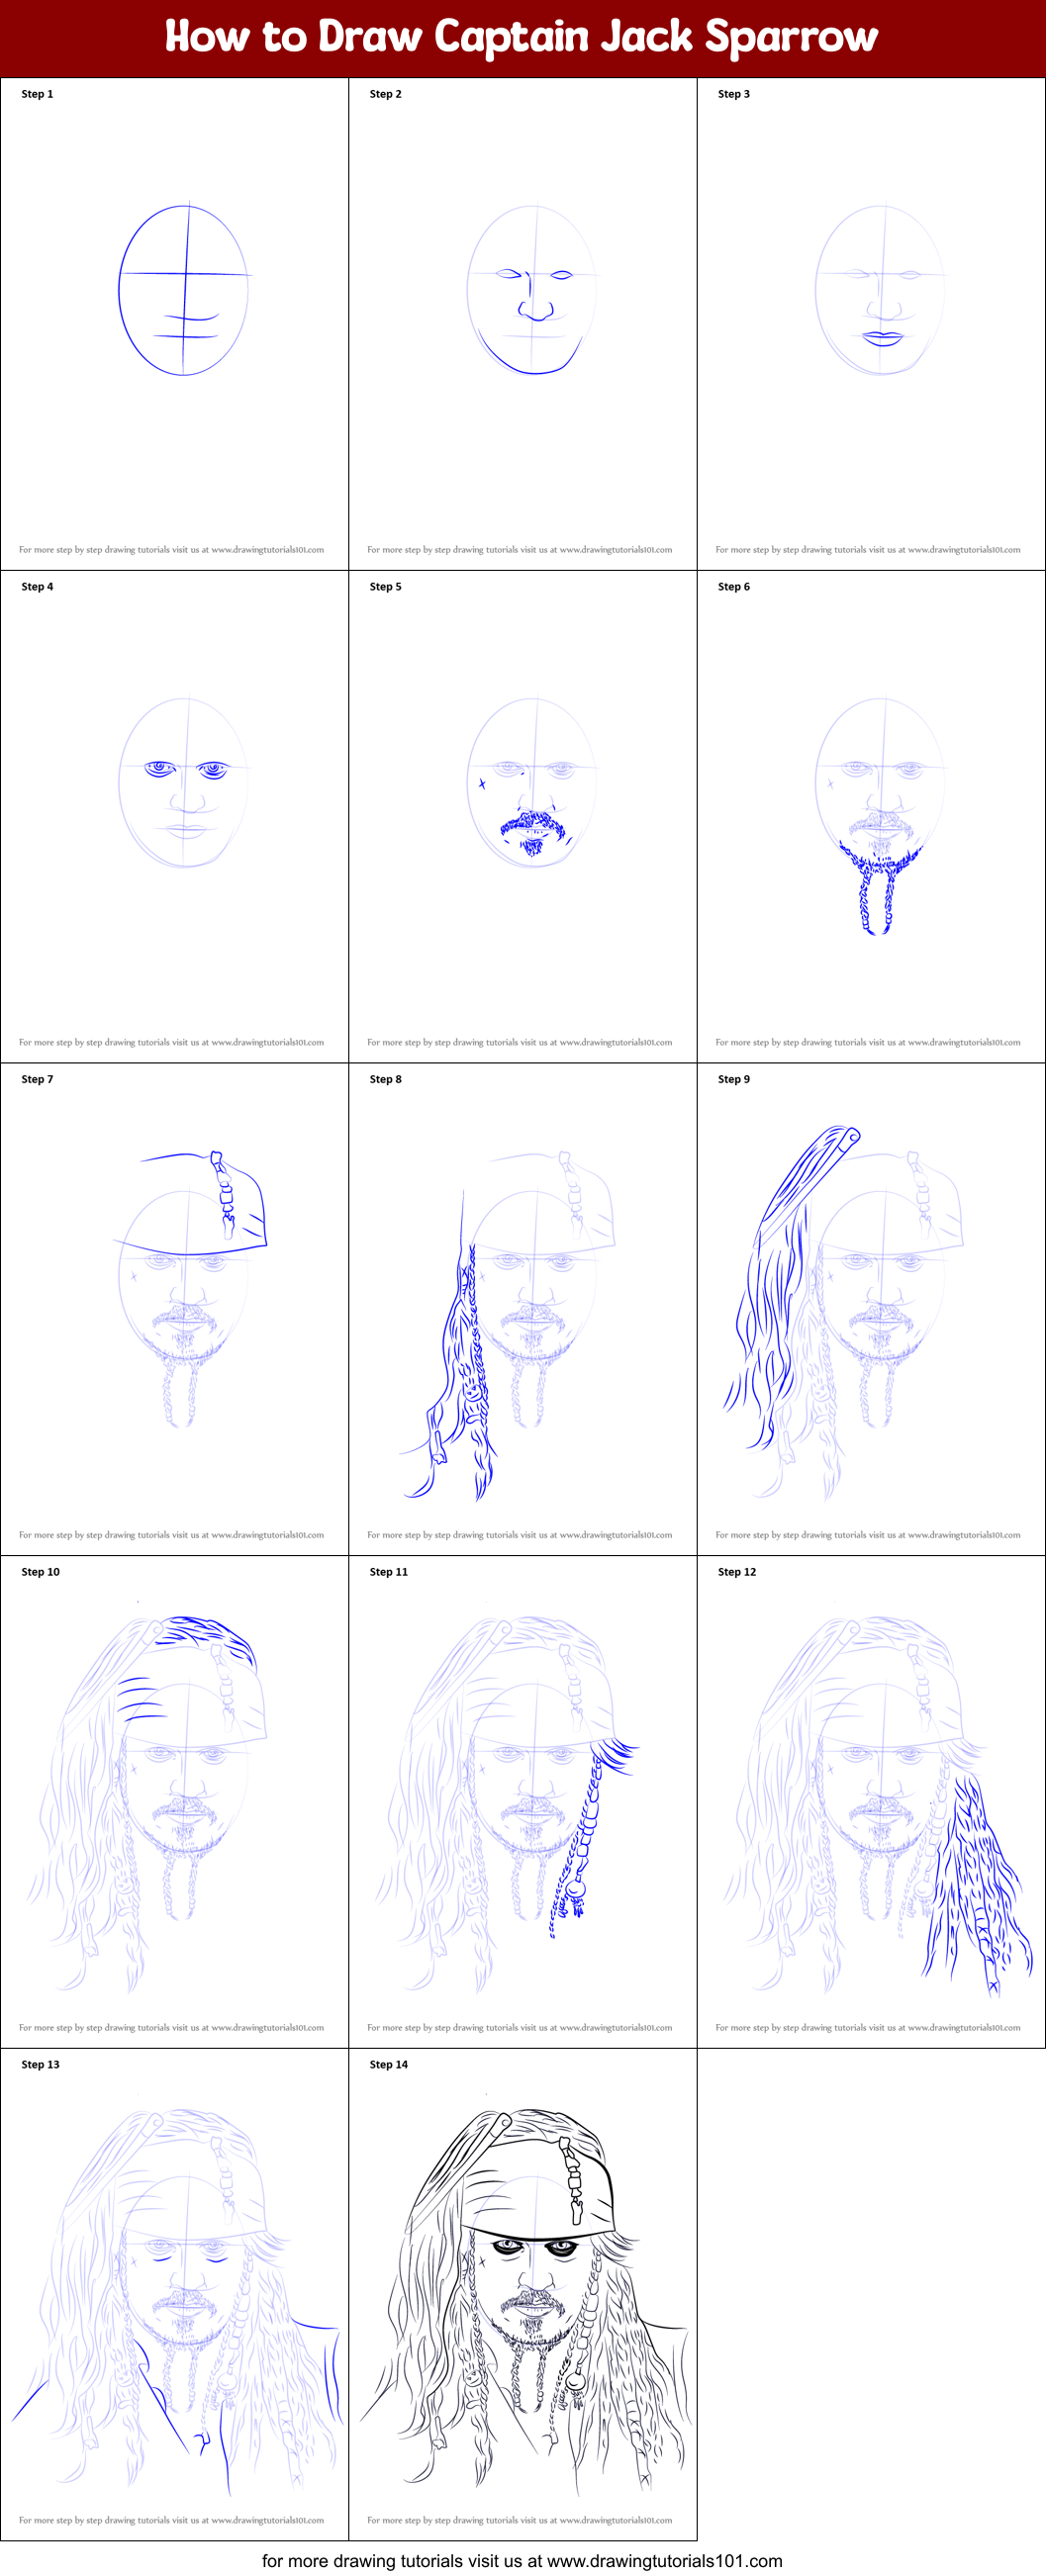 How to Draw Captain Jack Sparrow printable step by step drawing sheet